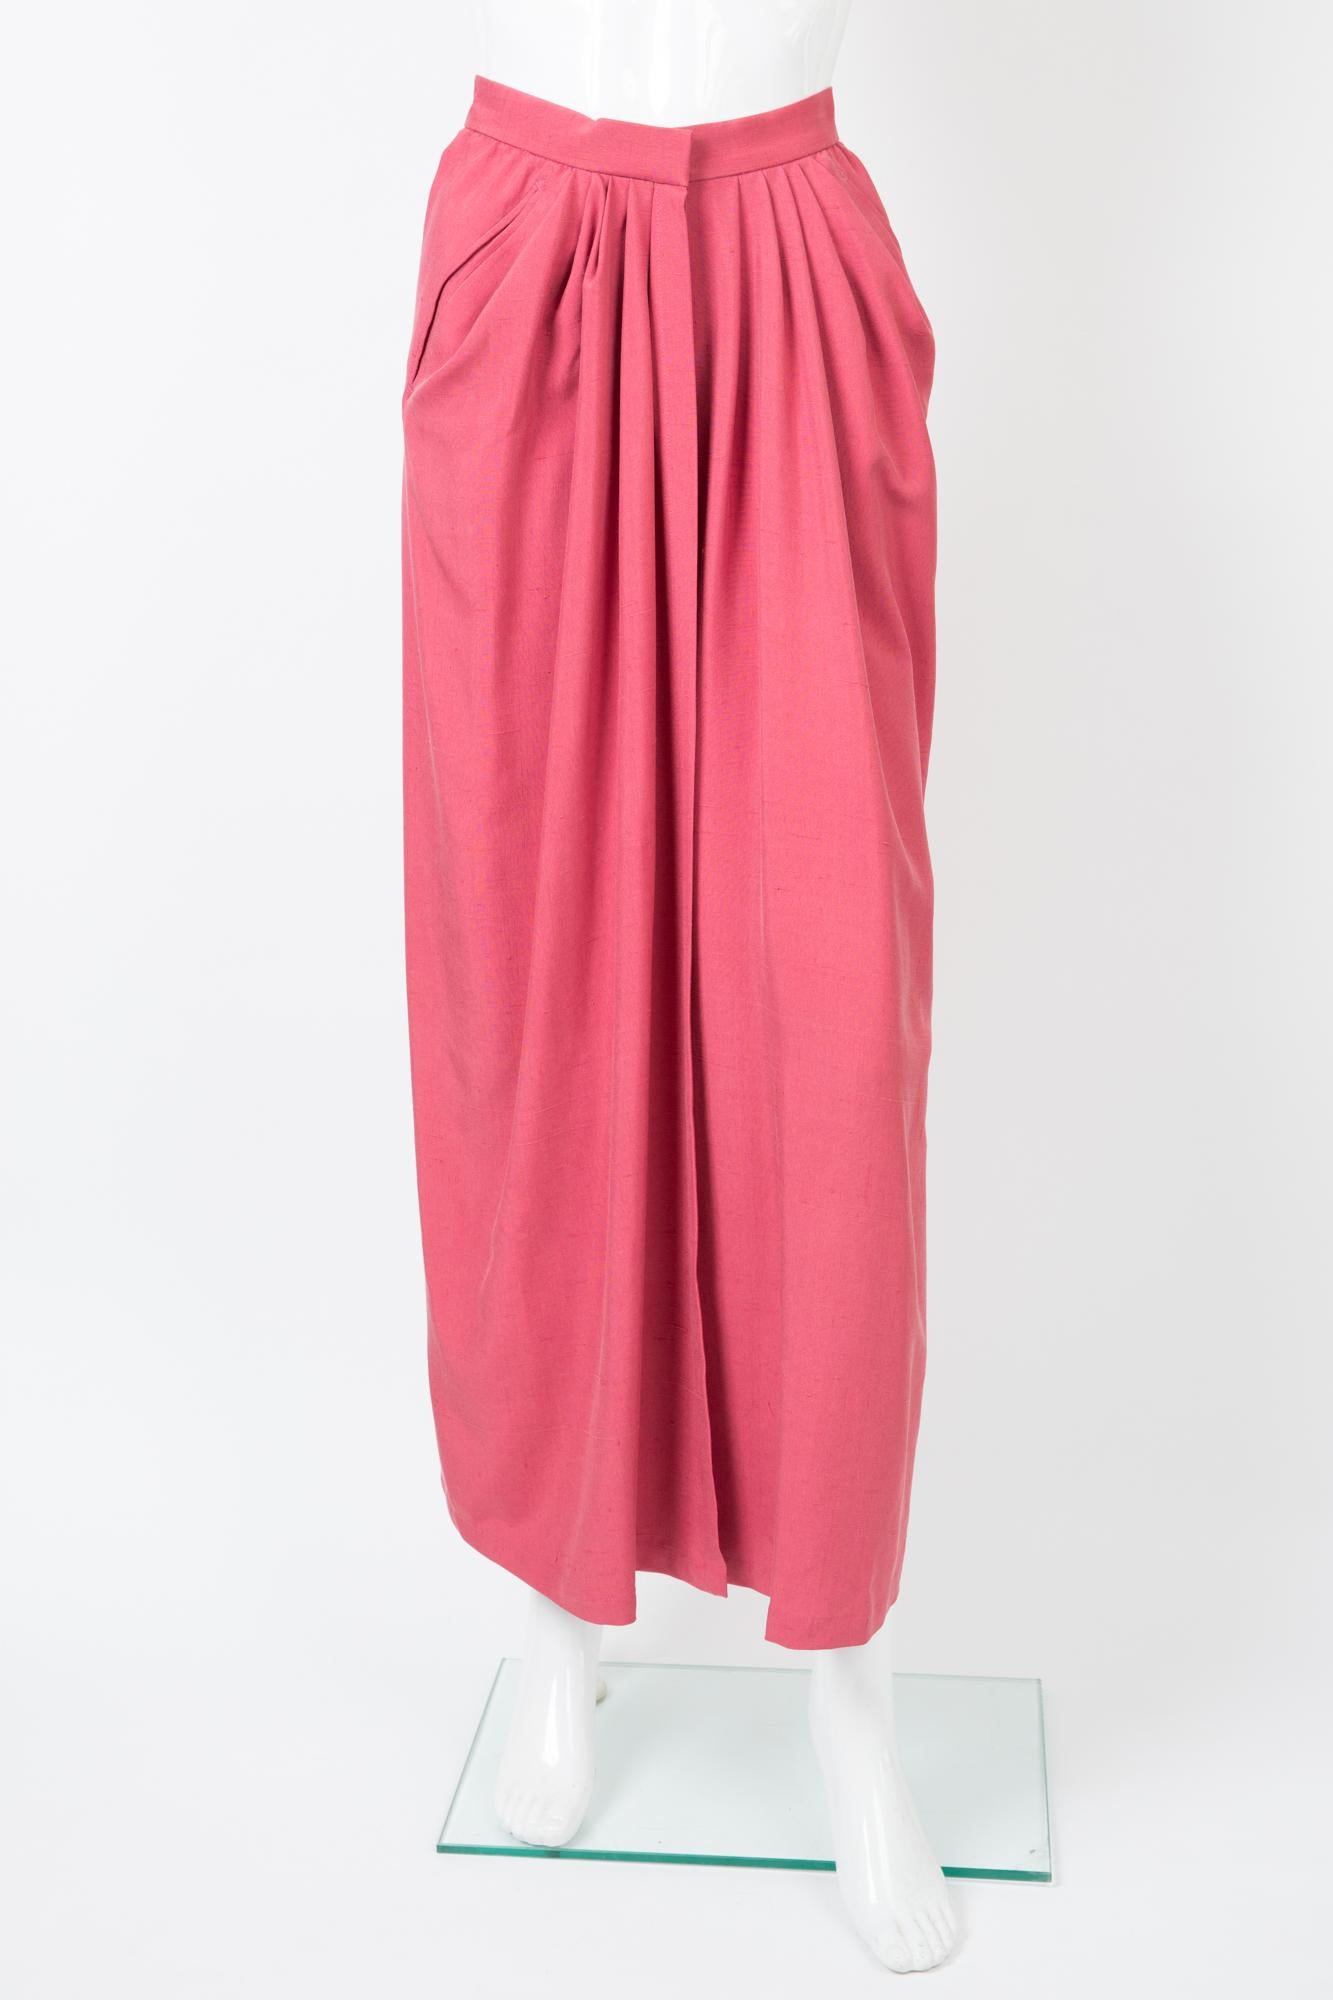 1980s Yves Saint Laurent maxi long pink silk skirt featuring a front opening with a hook & an inside button, front pleats, front bias pockets.
100% silk
In excellent vintage condition. Made in France. 
Label size 38fr but small waistband Estimated